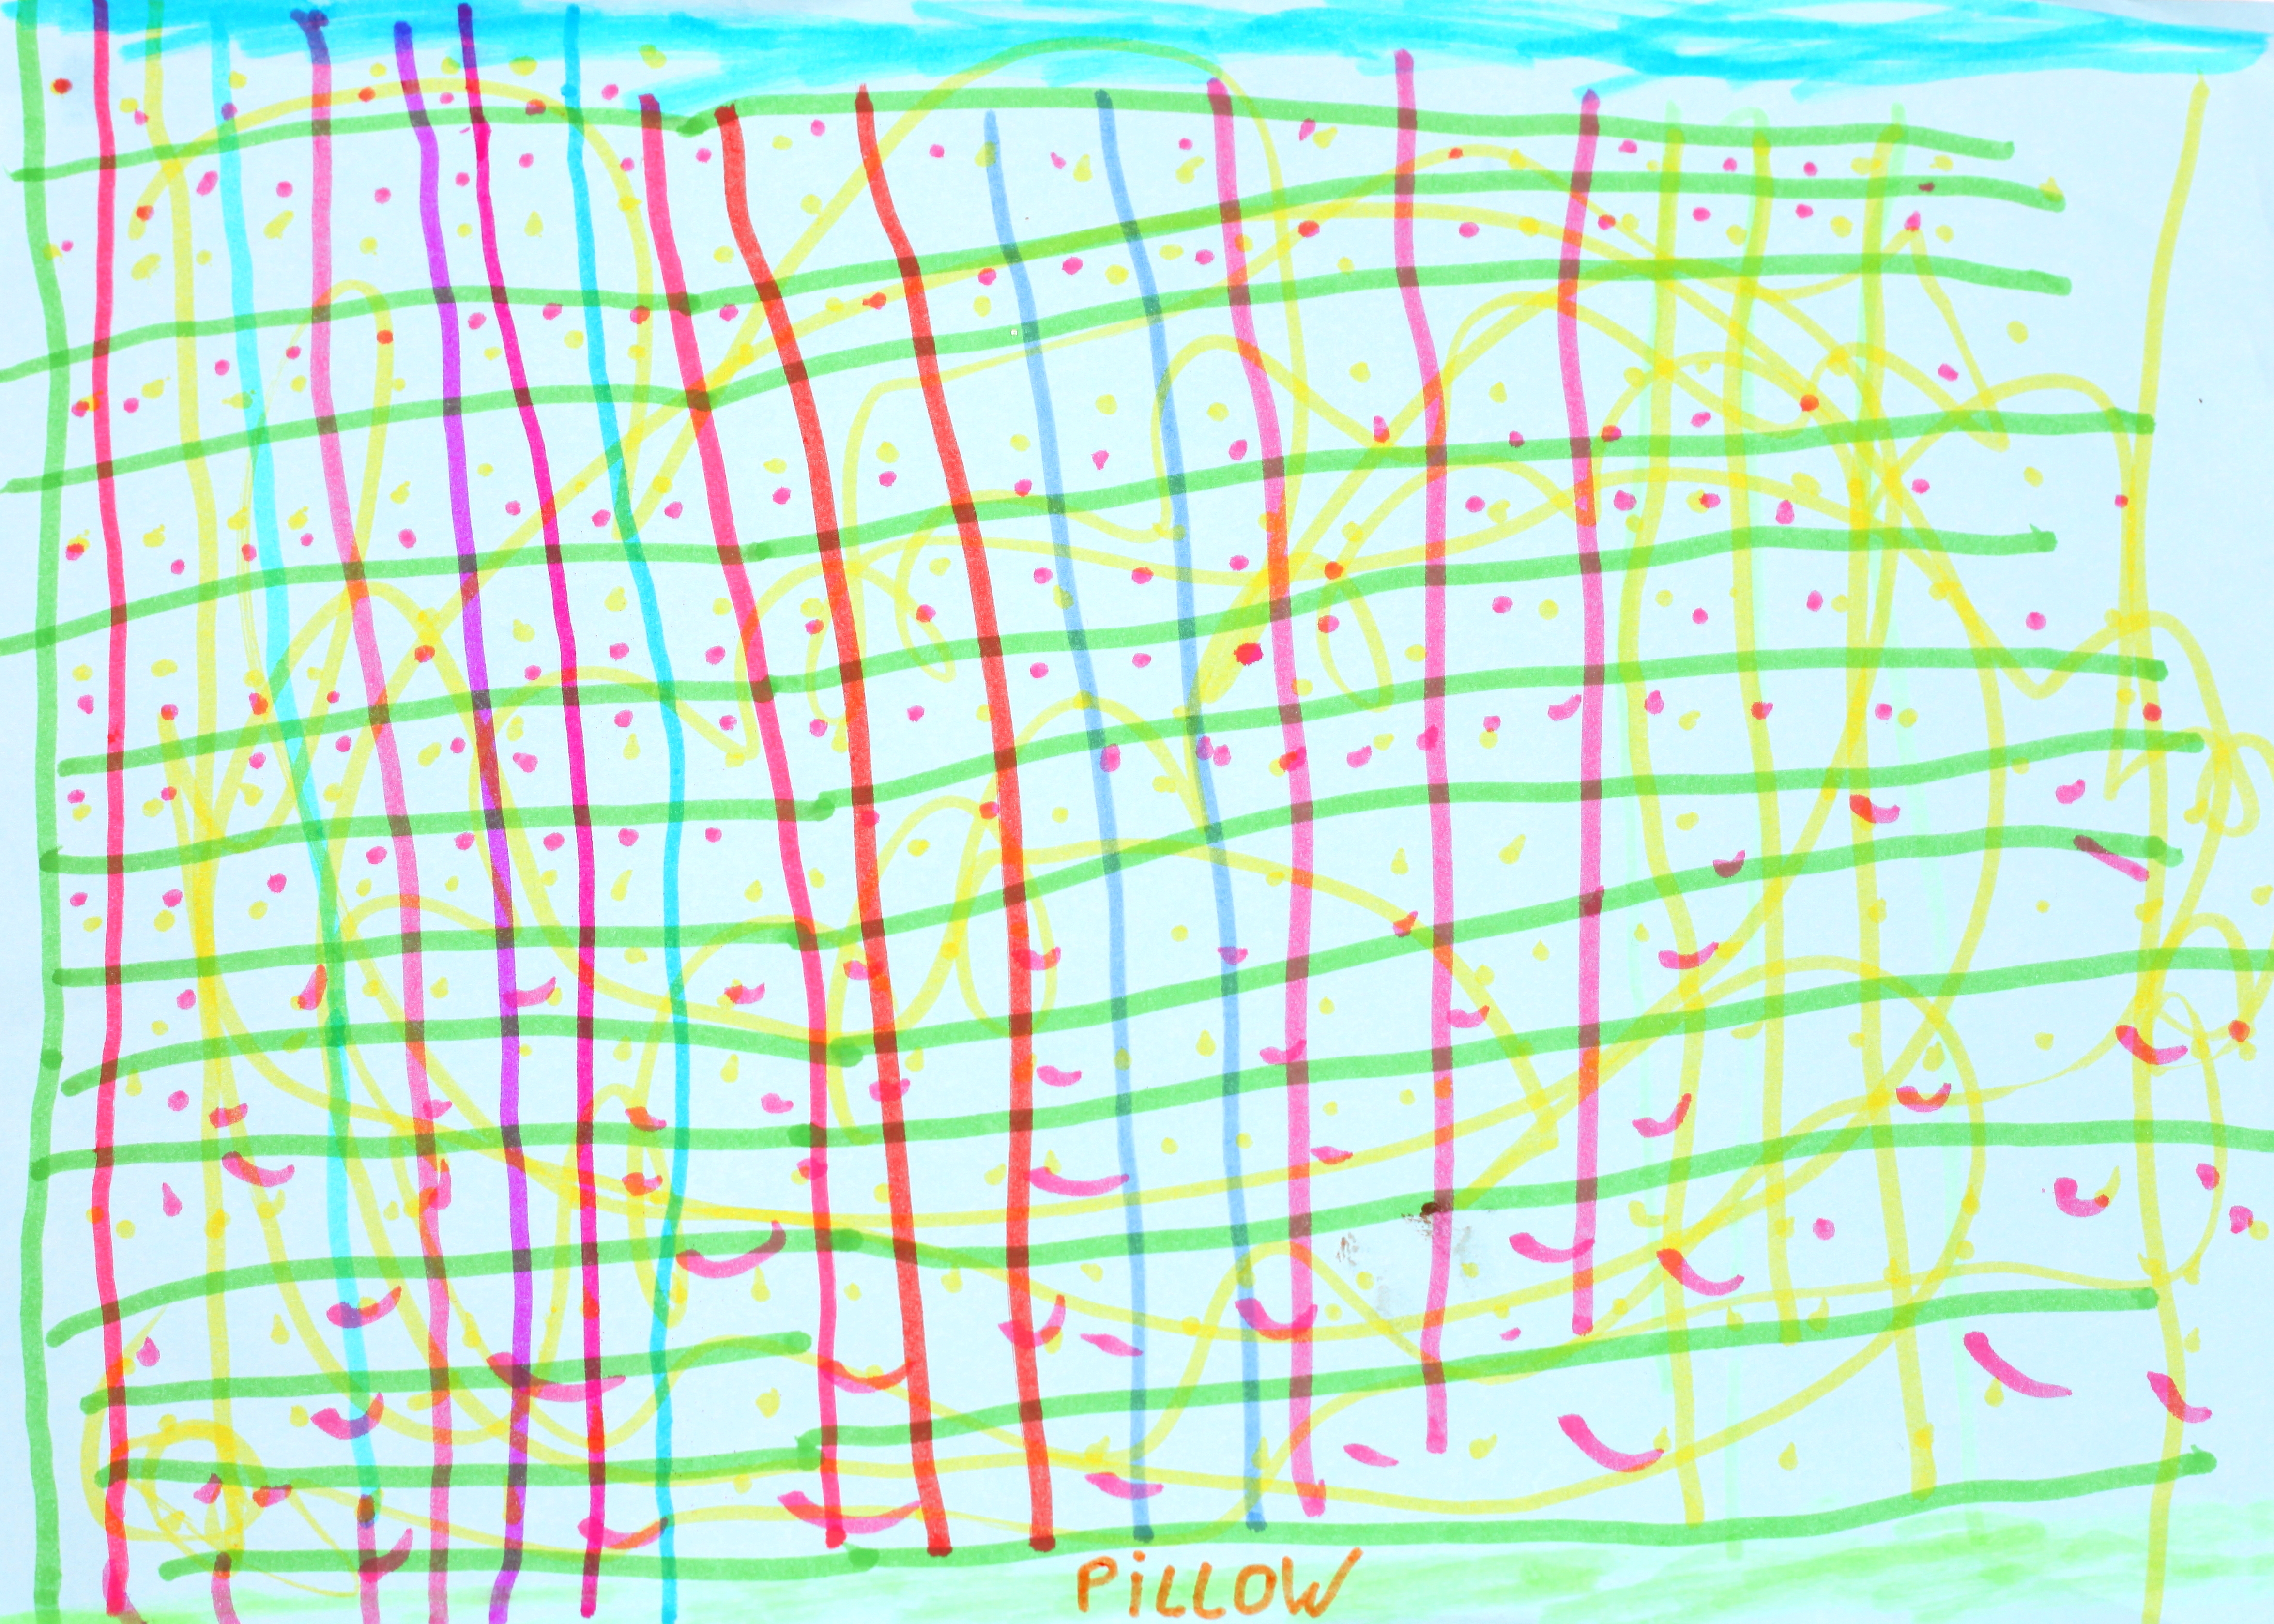 a painting by a 4 to 6 year old girl, picture 19